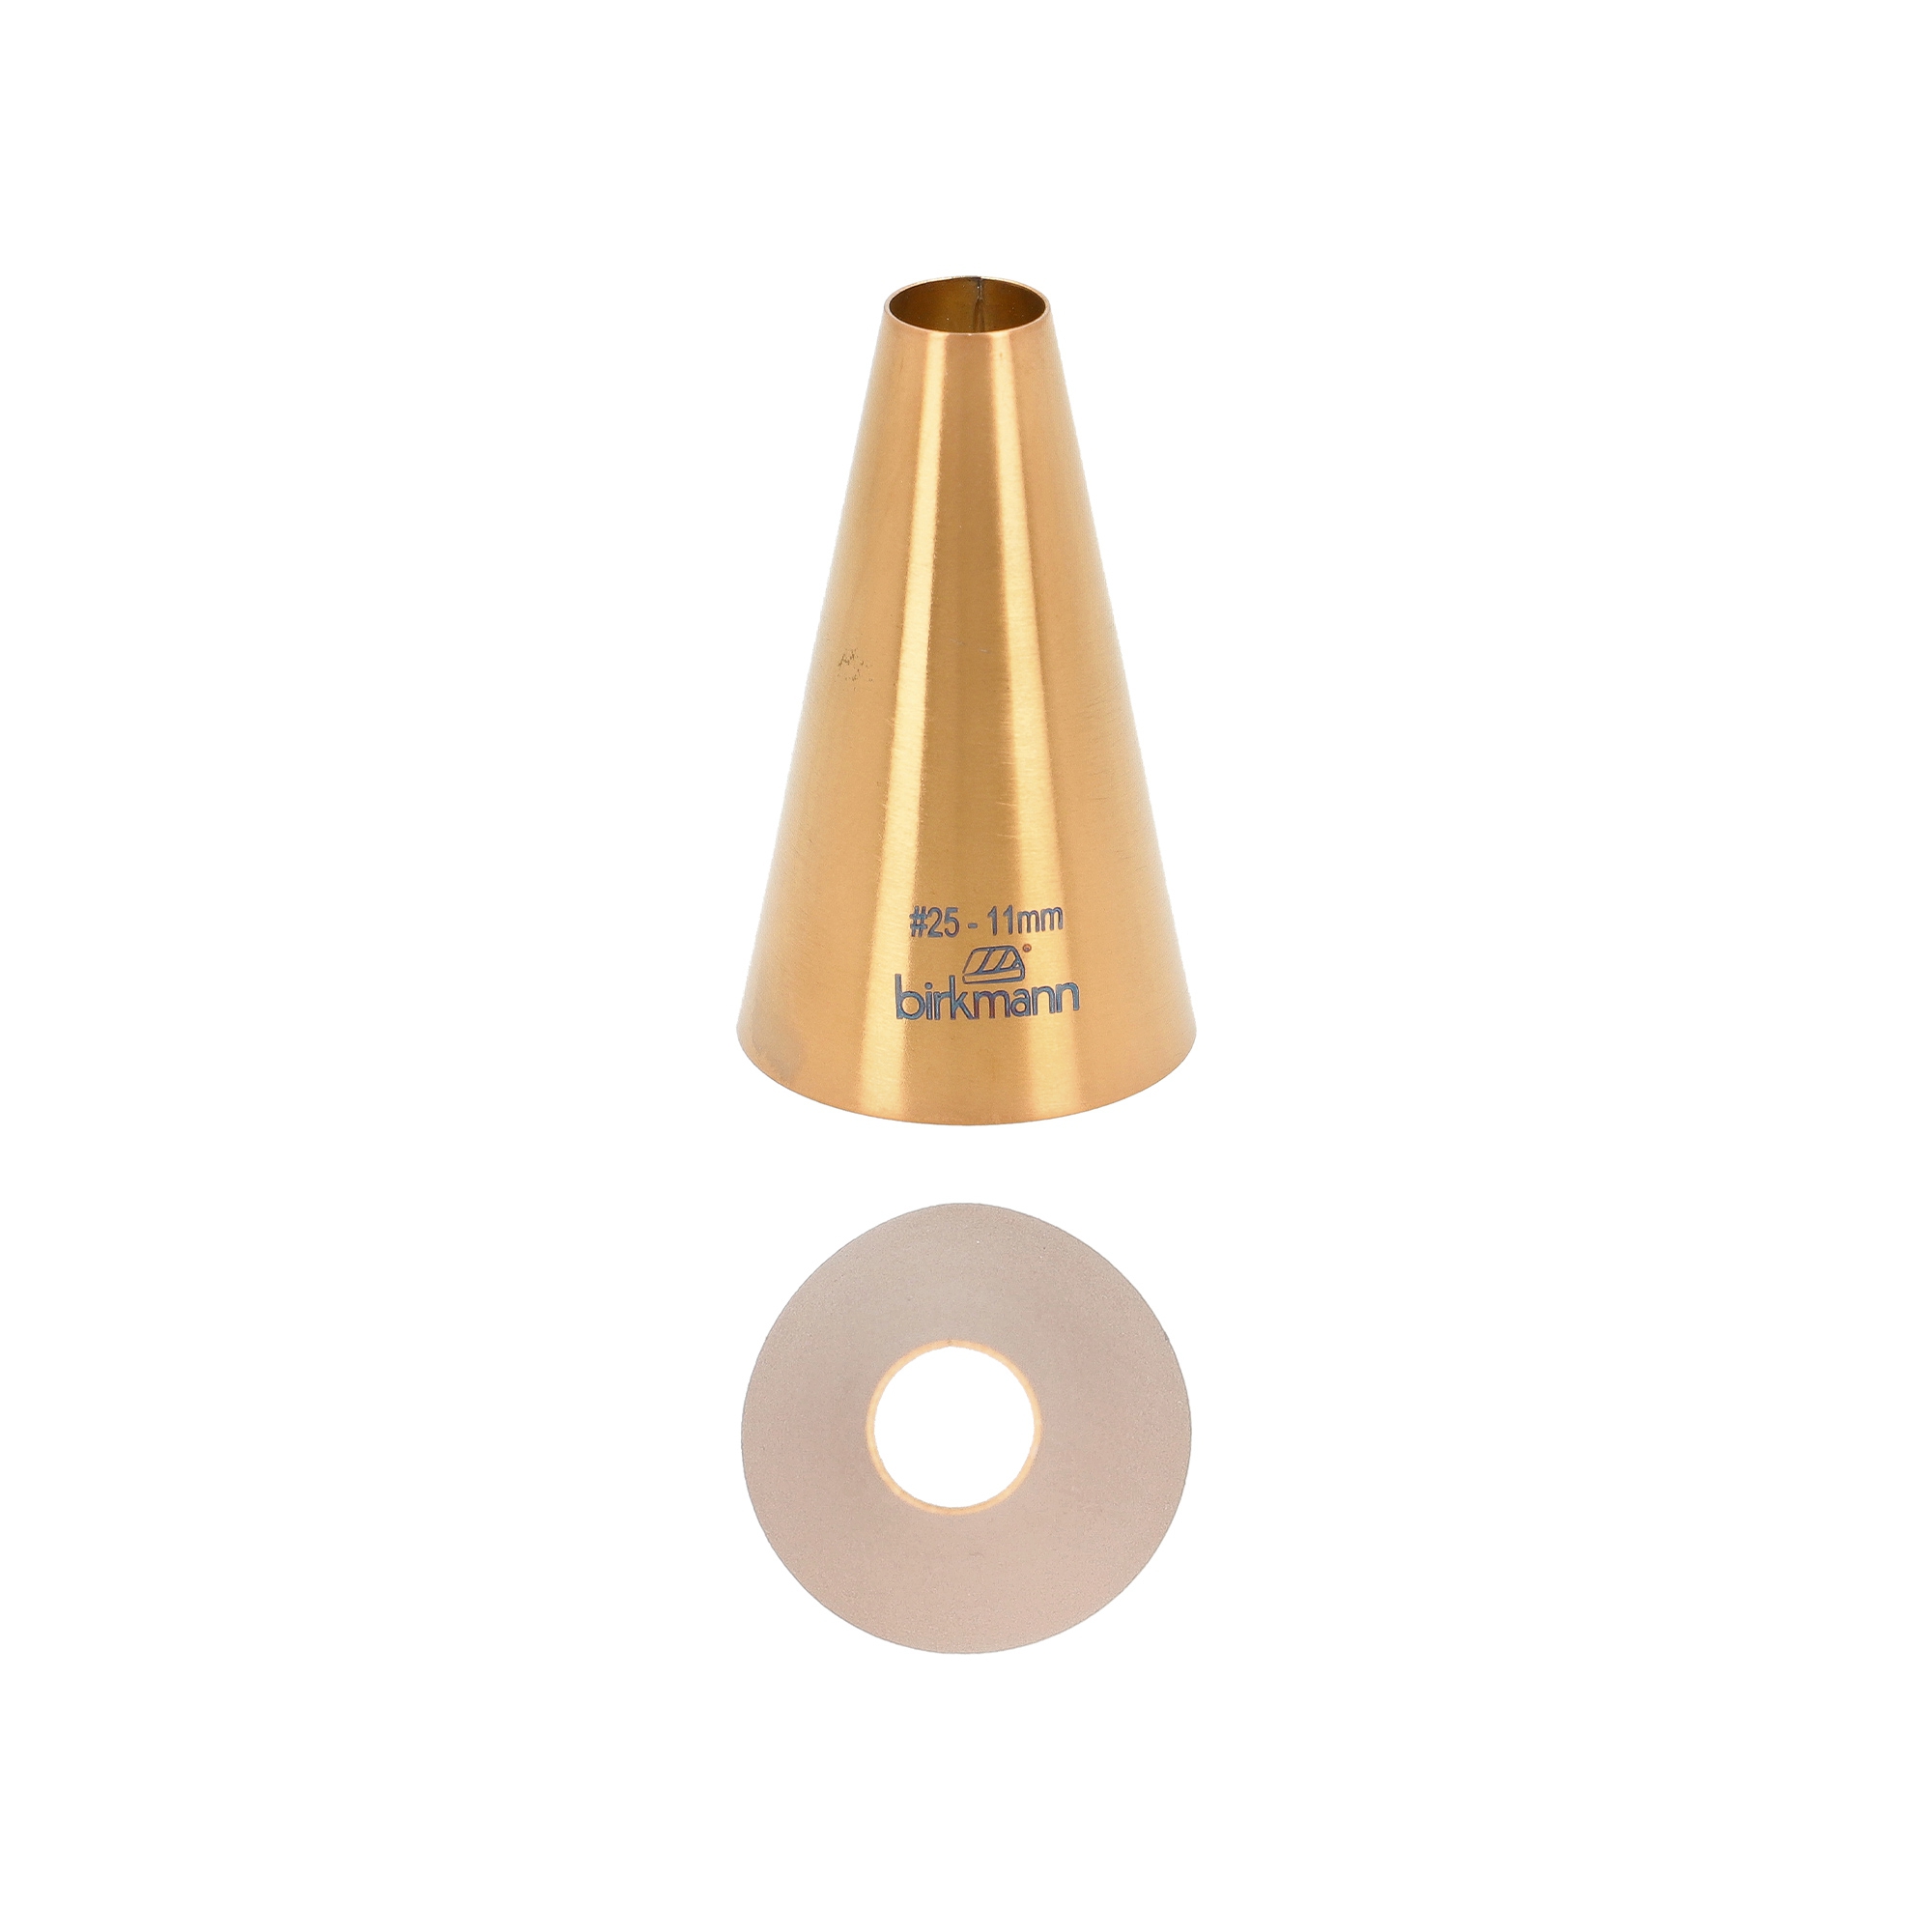 Birkmann - perforated nozzle copper colored #25 - 11mm